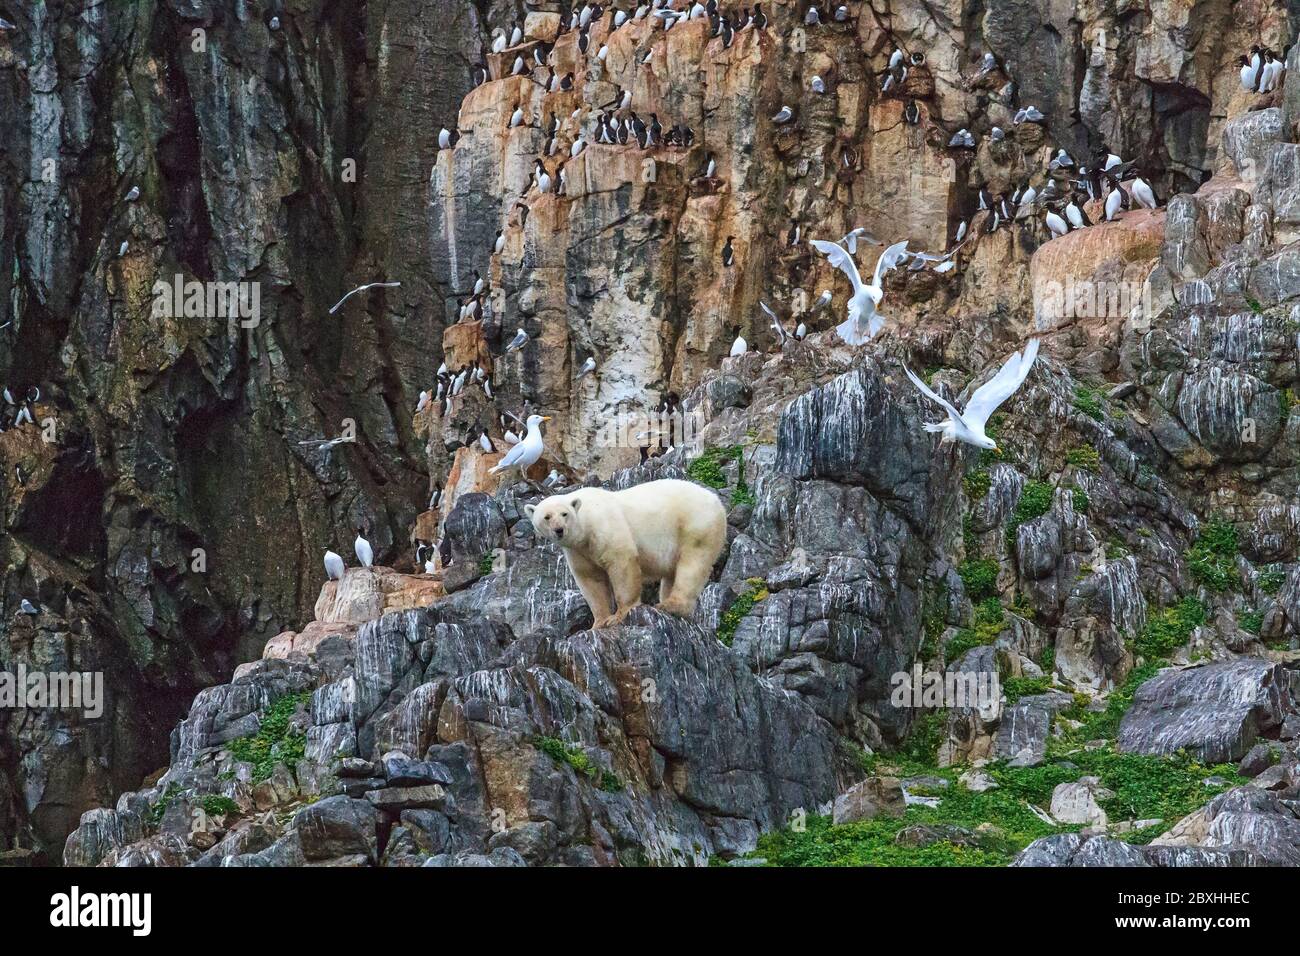 Young male polar bear rests and hunts nesting seabirds on rocky cliff of Coburg Island, NW Passage, Nunavut, arctic Canada. Stock Photo